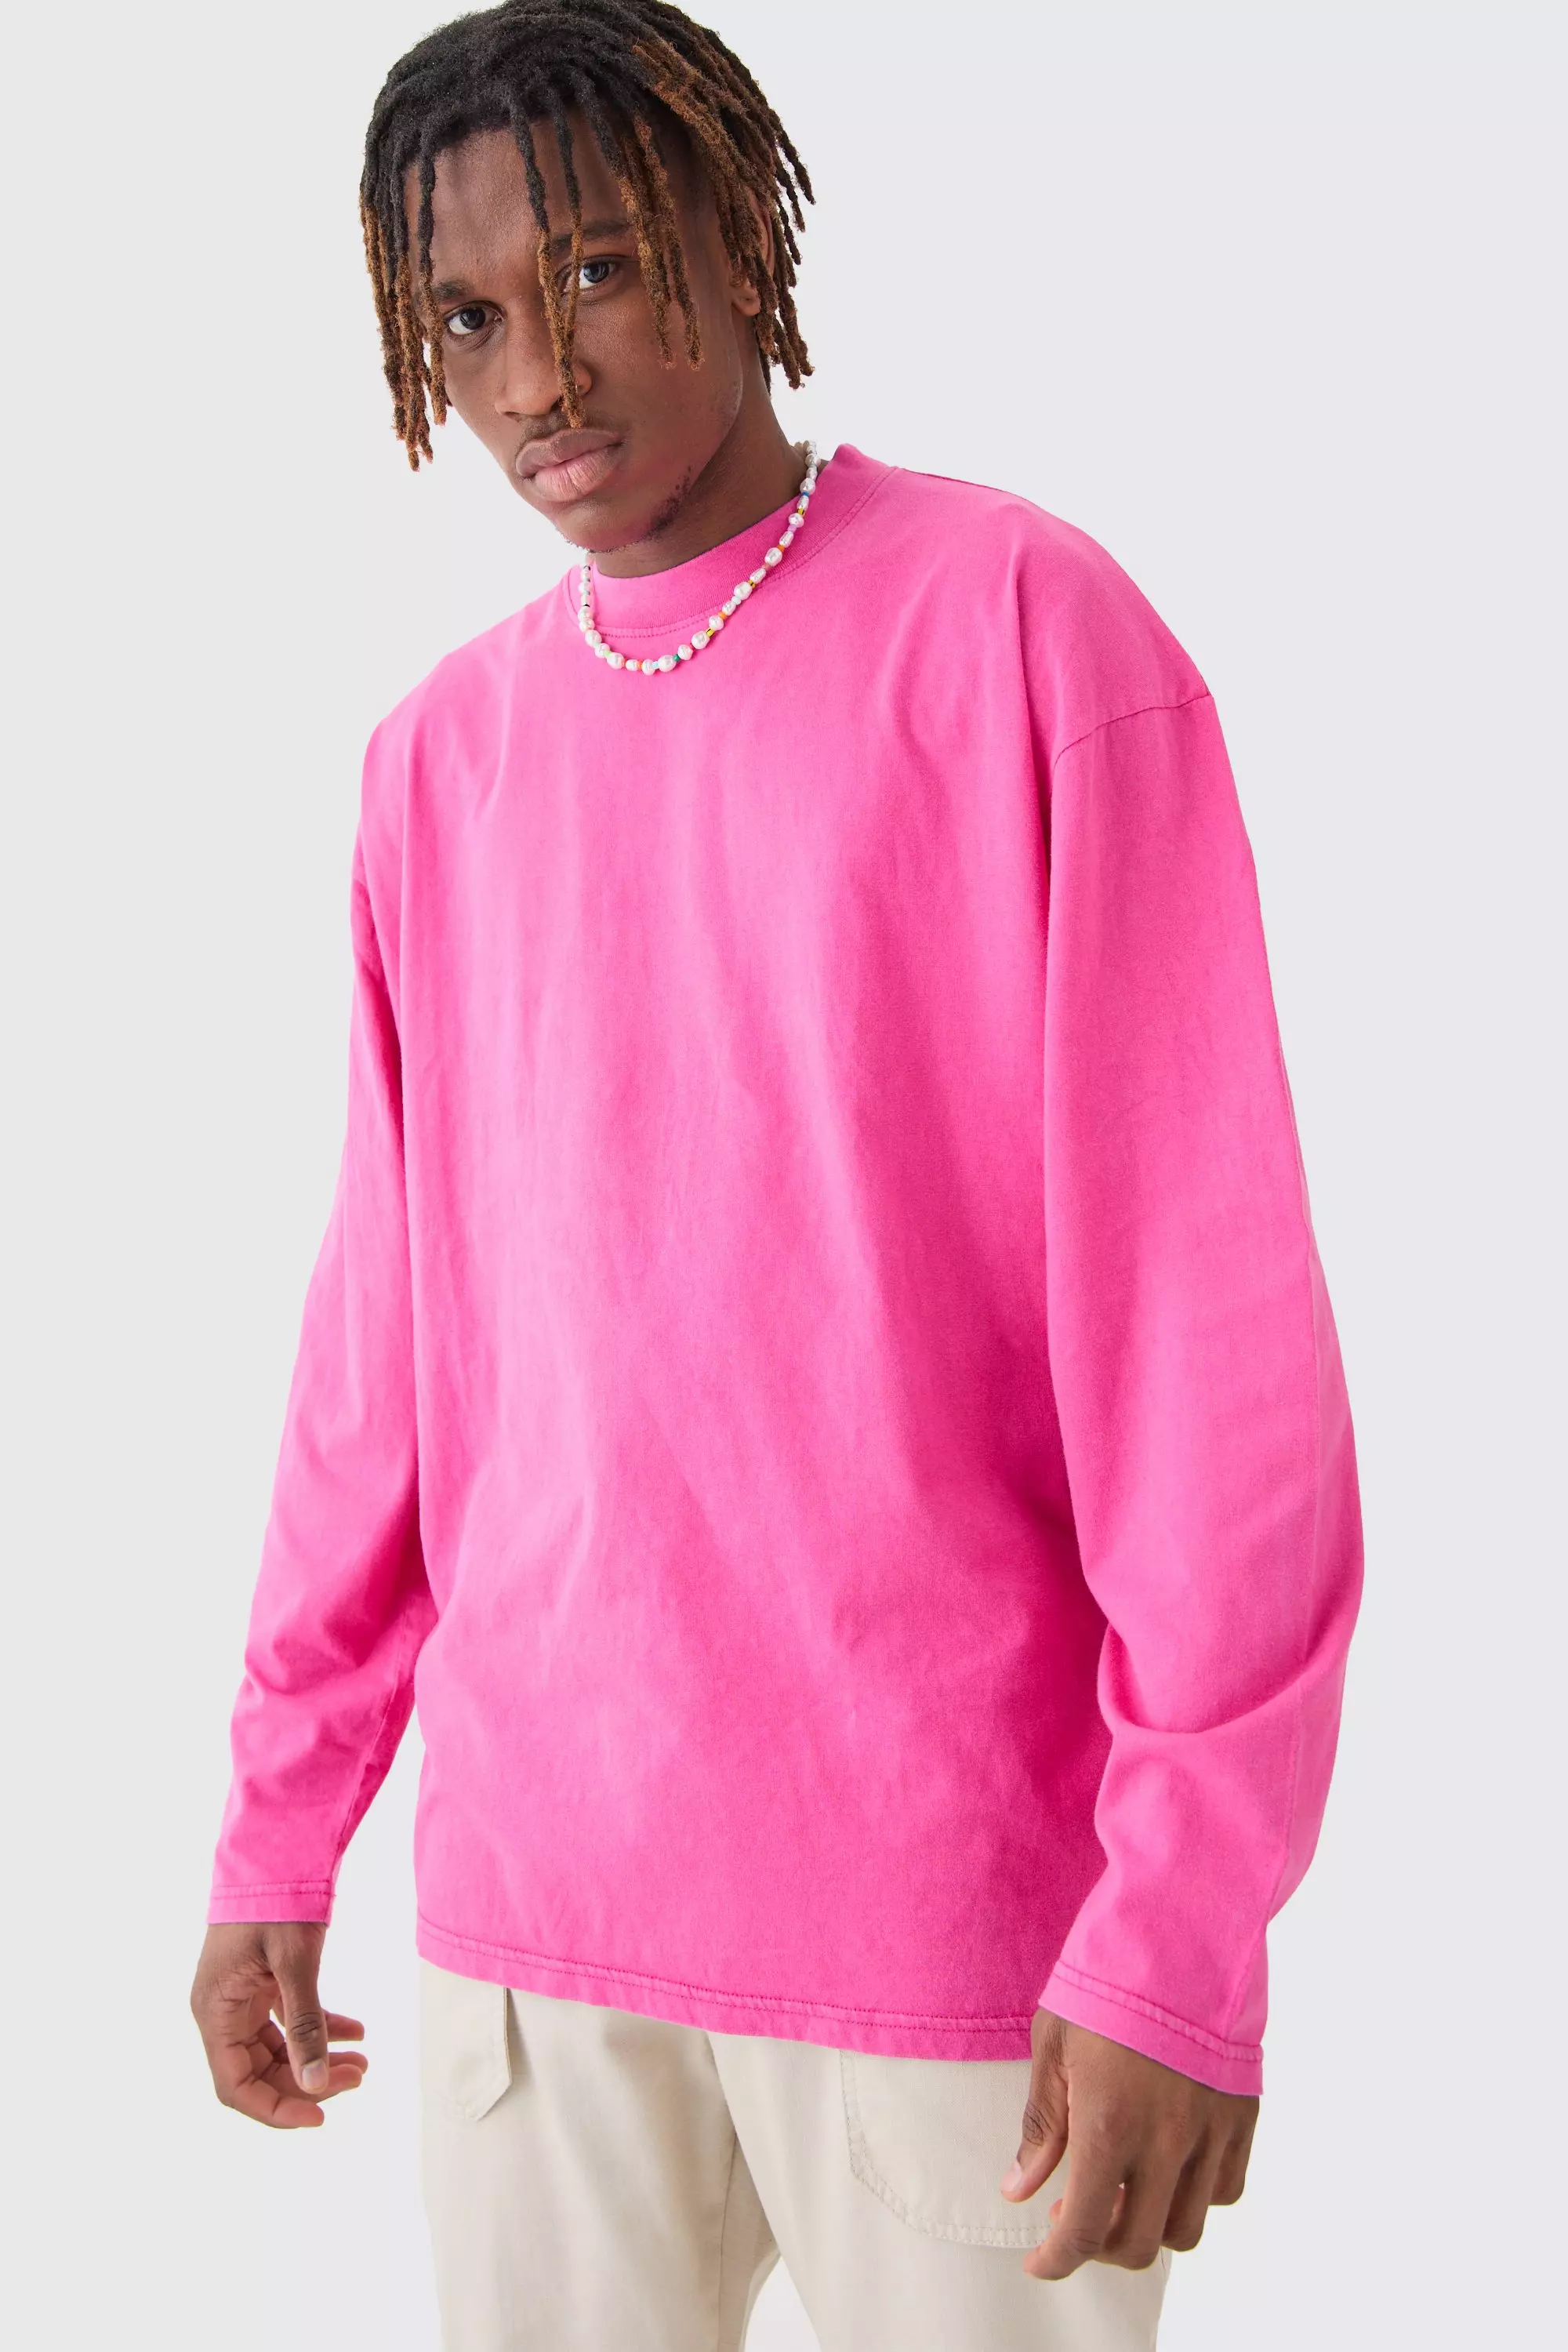 Tall Oversized Extended Neck Acid Wash Long Sleeve T-shirt Pink